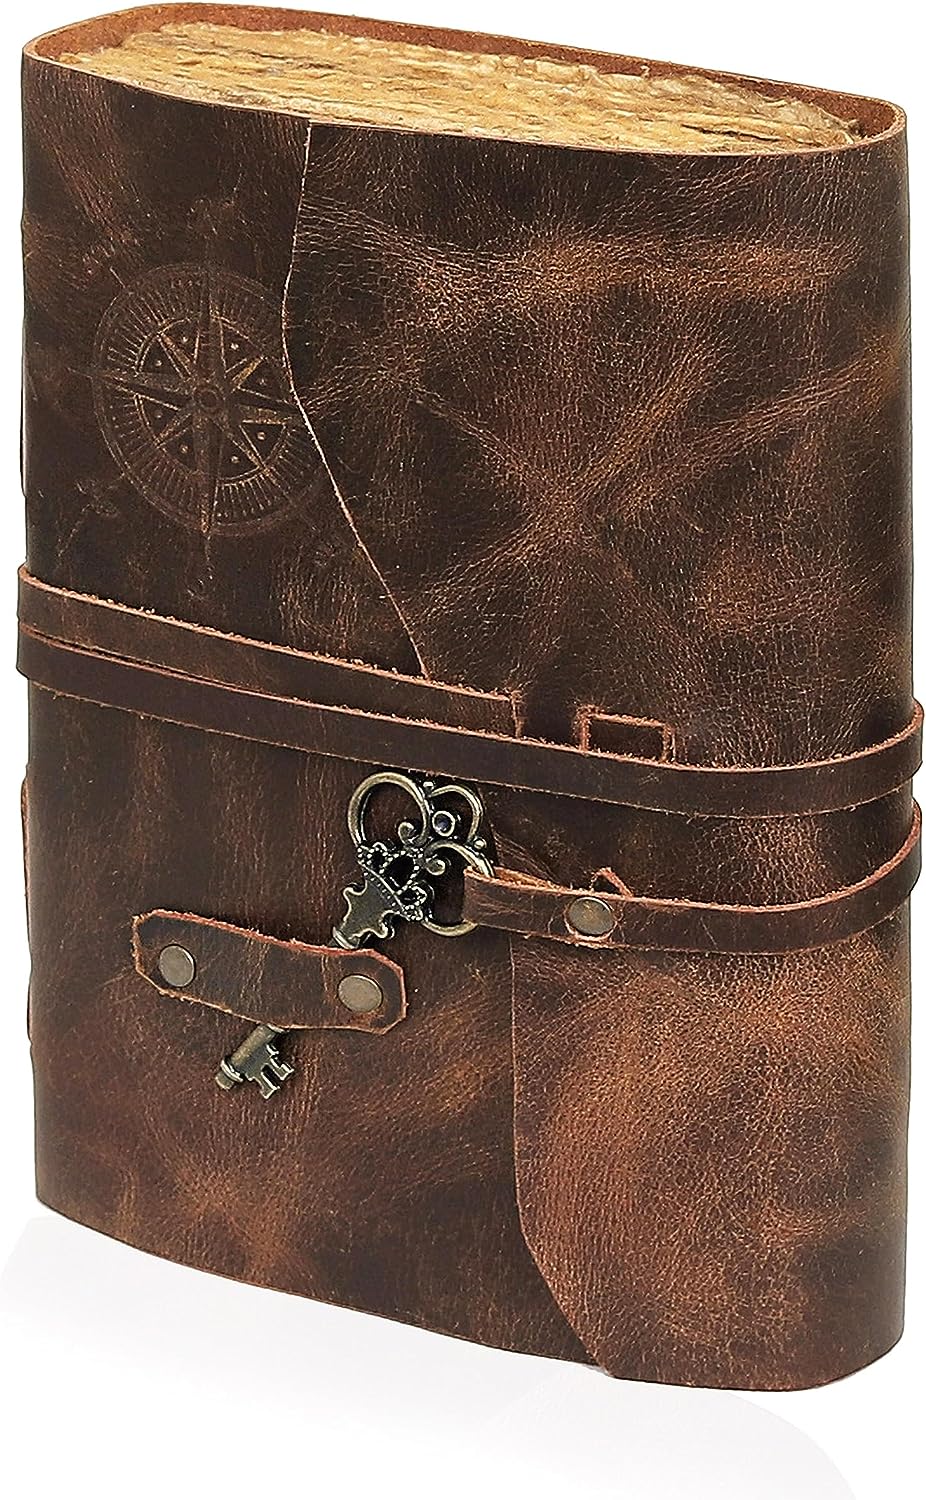 Compass Vintage Leather Journal - Antique Handmade Leather Bound journal with deckle edge paper for Men And Women Diary - Leather Sketchbook - Drawing Journal Notebook - Great Gift (Vintage Brown,8"x6 - image 5 of 9